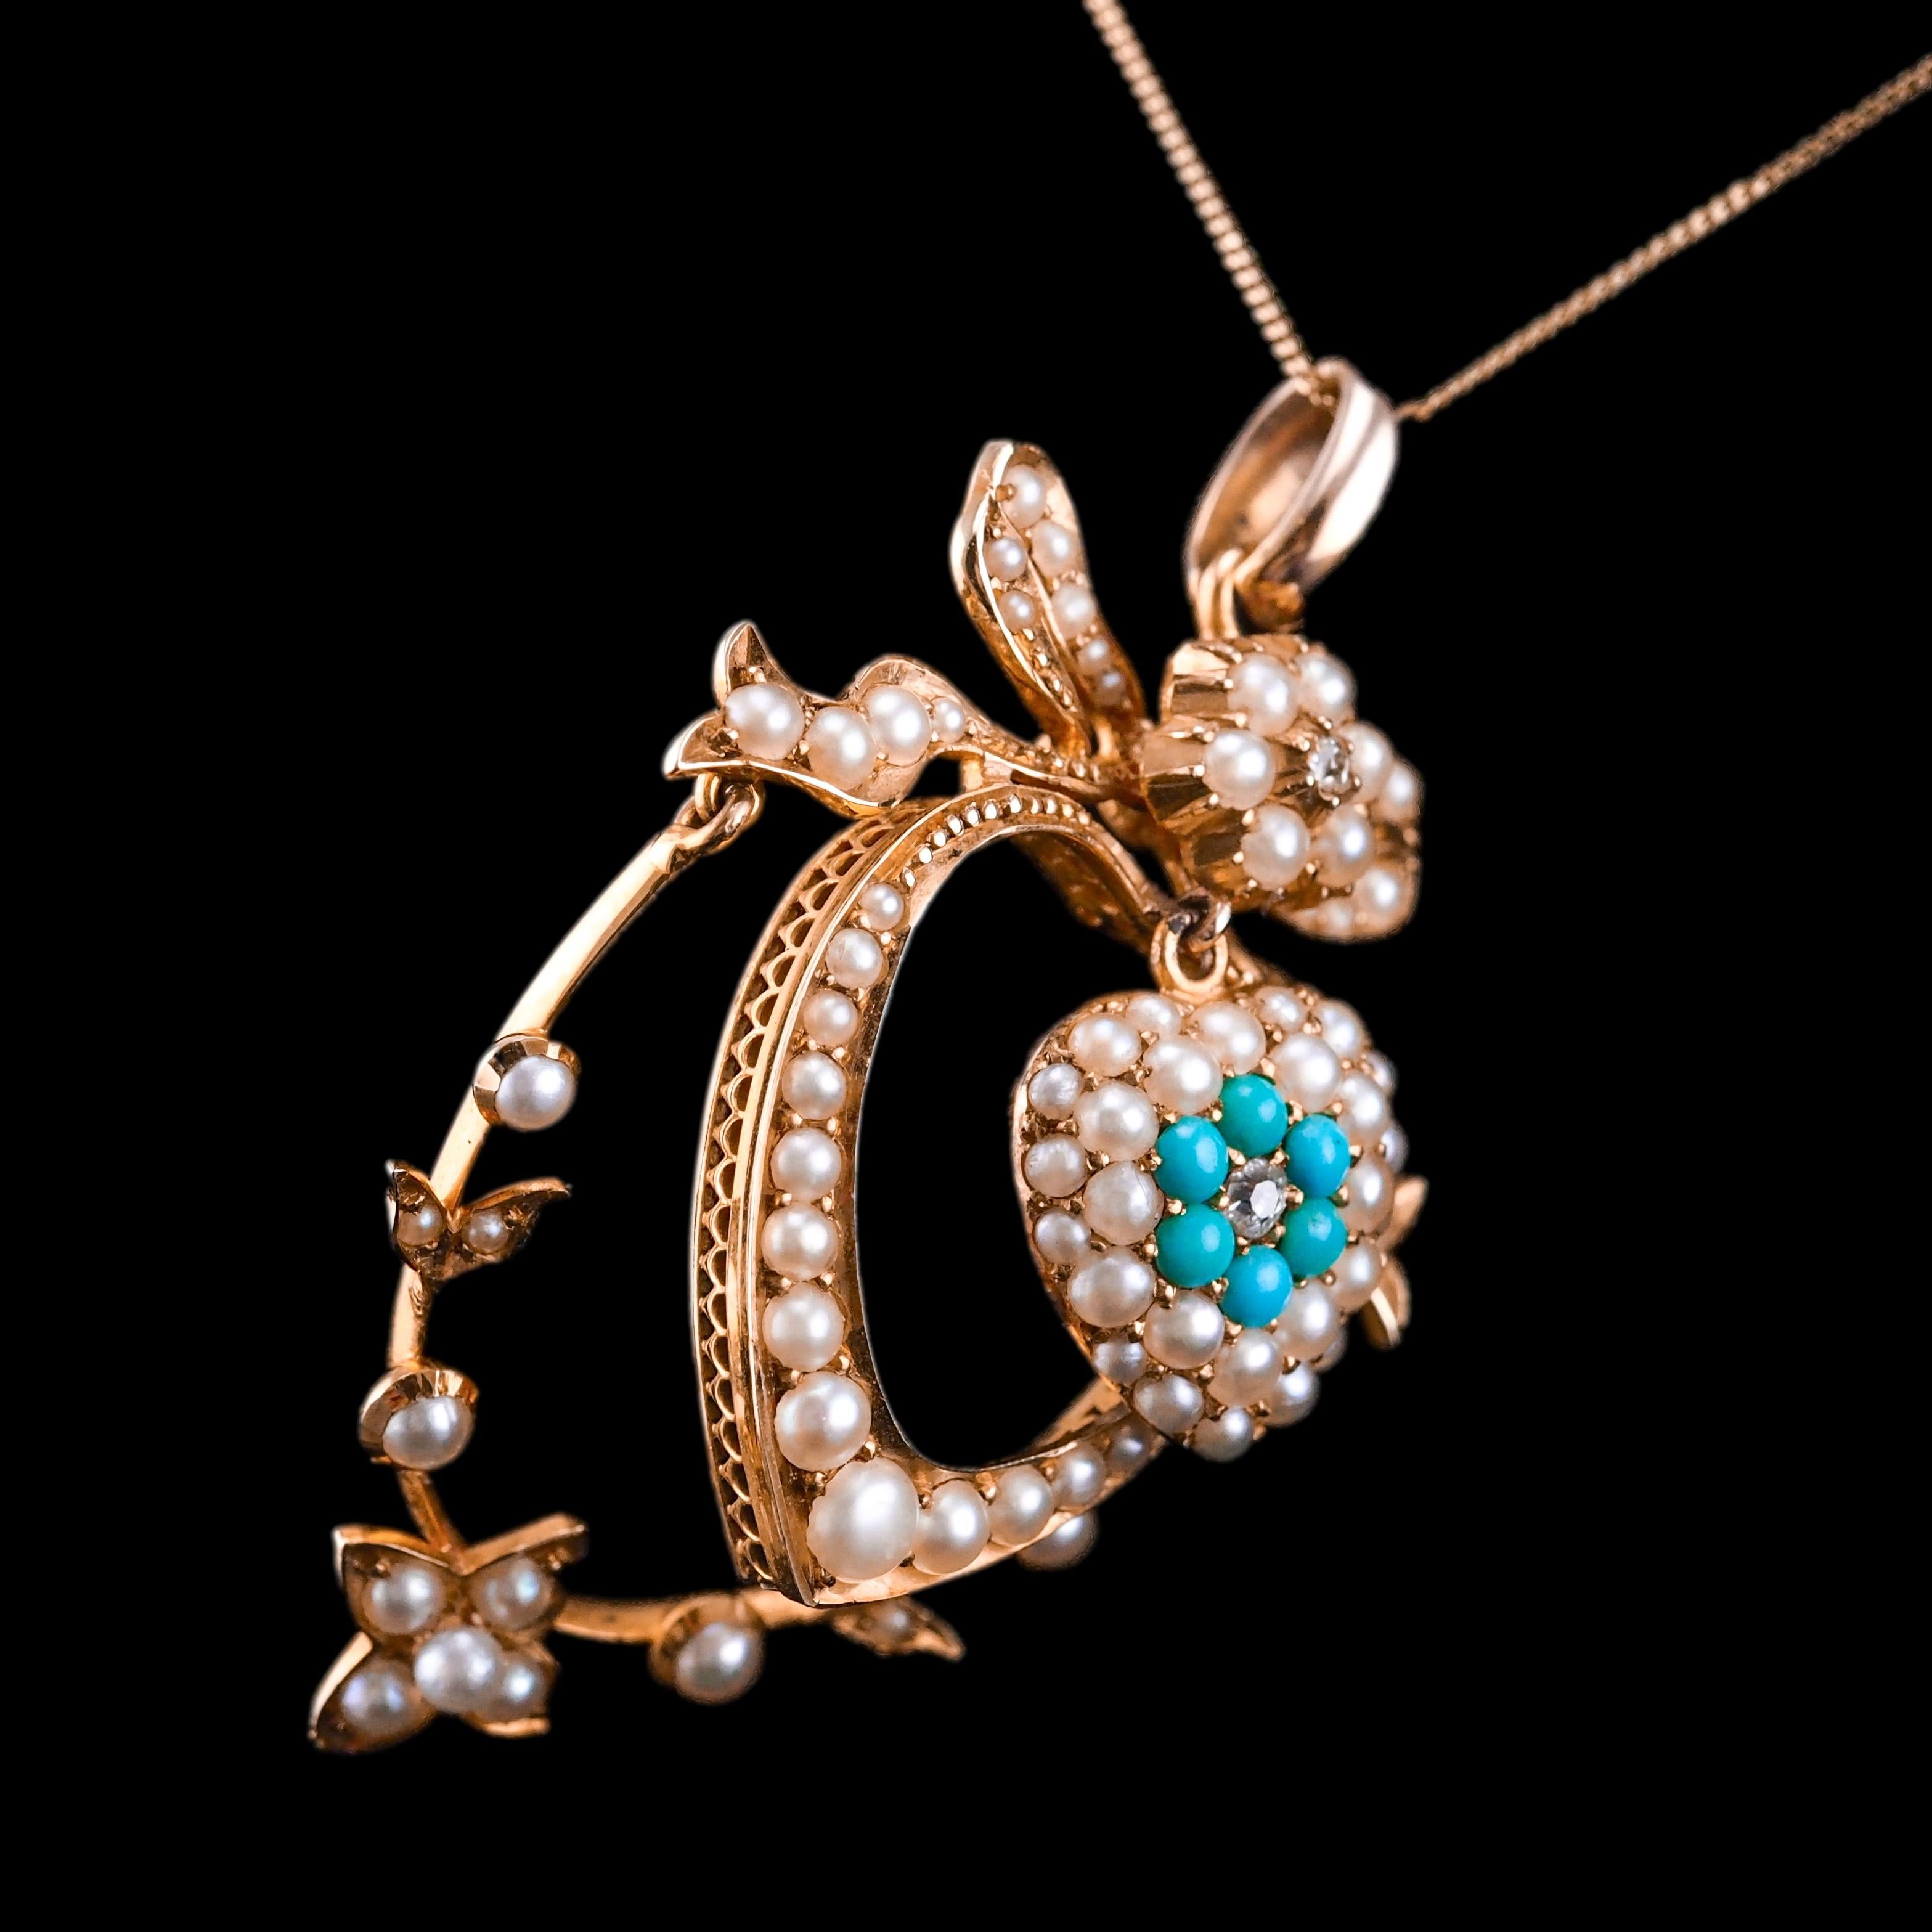 We are delighted to offer this spectacular antique Edwardian 15ct gold turquoise, diamond and pearl pendant necklace made c.1910.
 
Apparent upon a quick glance, this pendant presents an exquisite & elegant bow and heart-shaped Edwardian design that